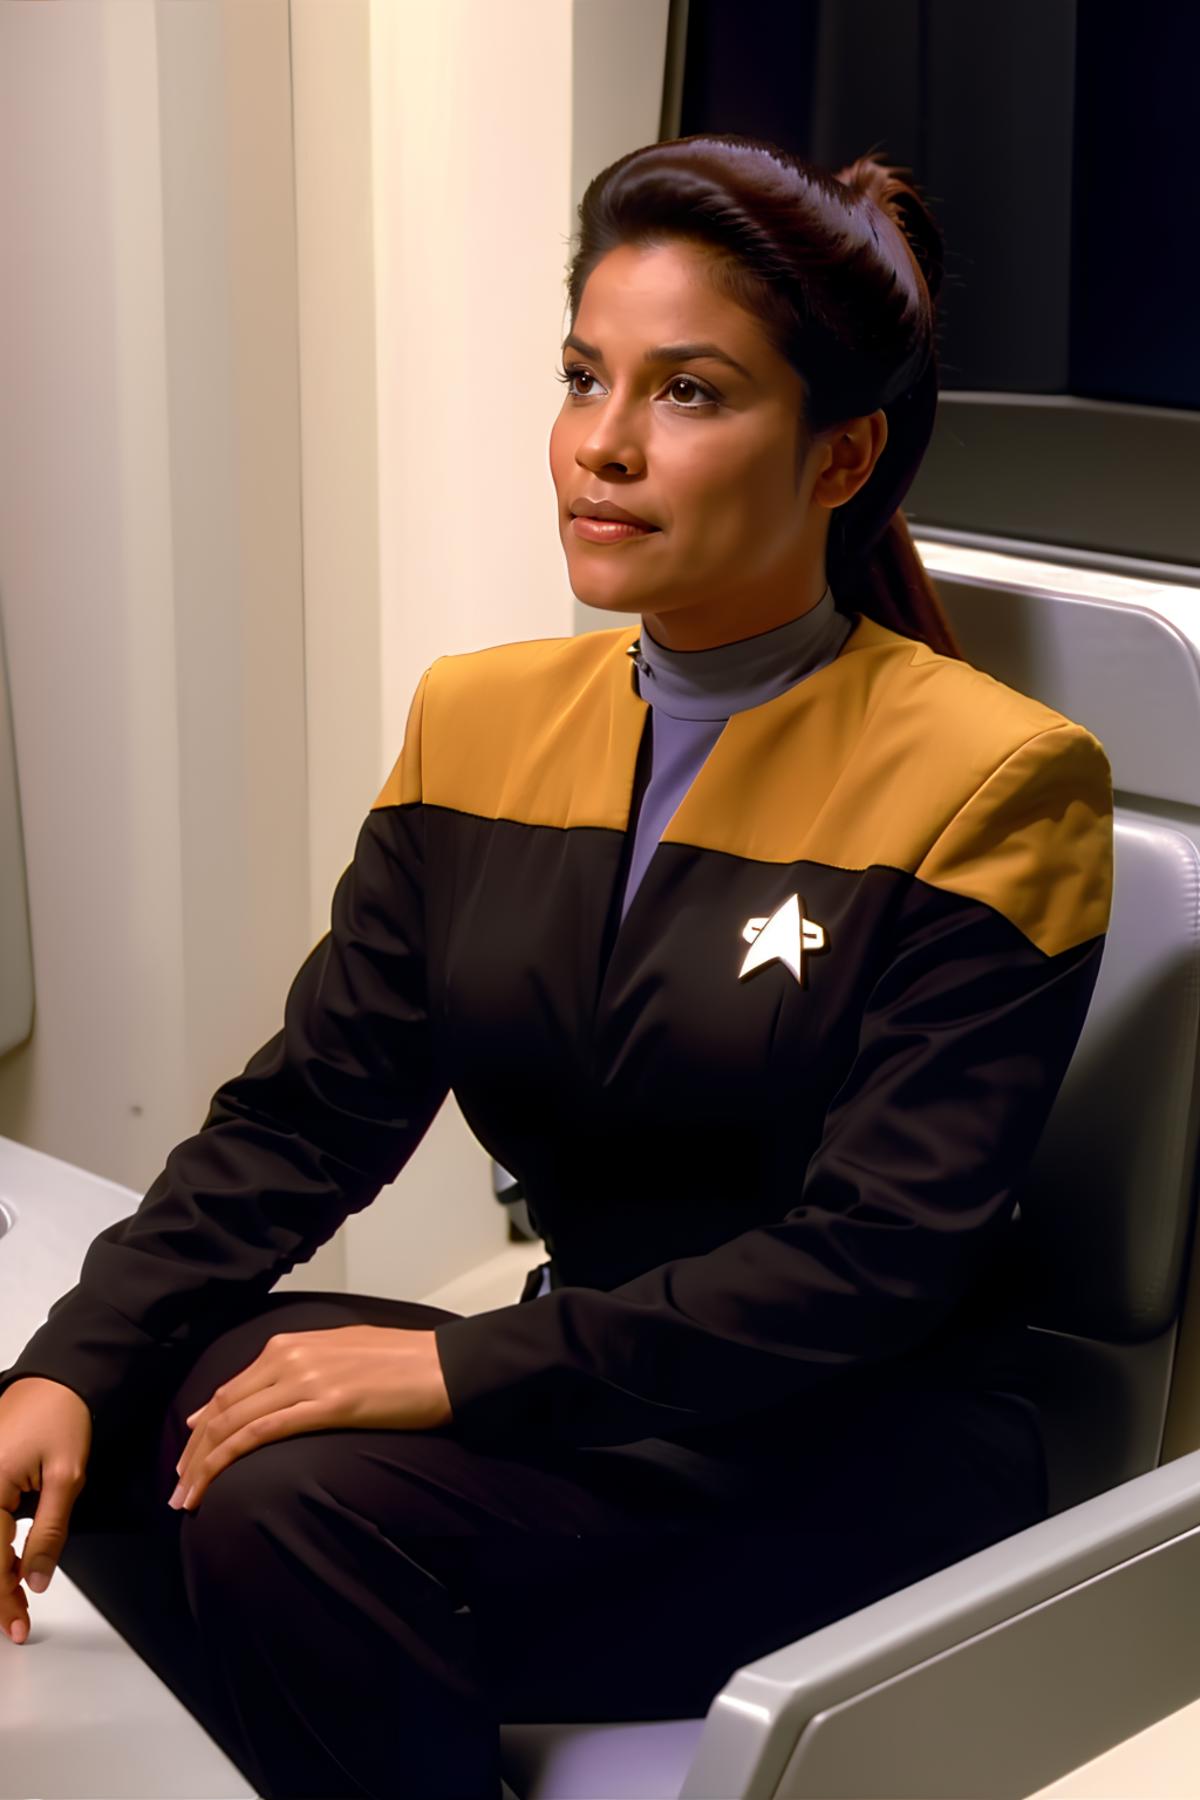 Star Trek Voyager uniforms image by impossiblebearcl4060